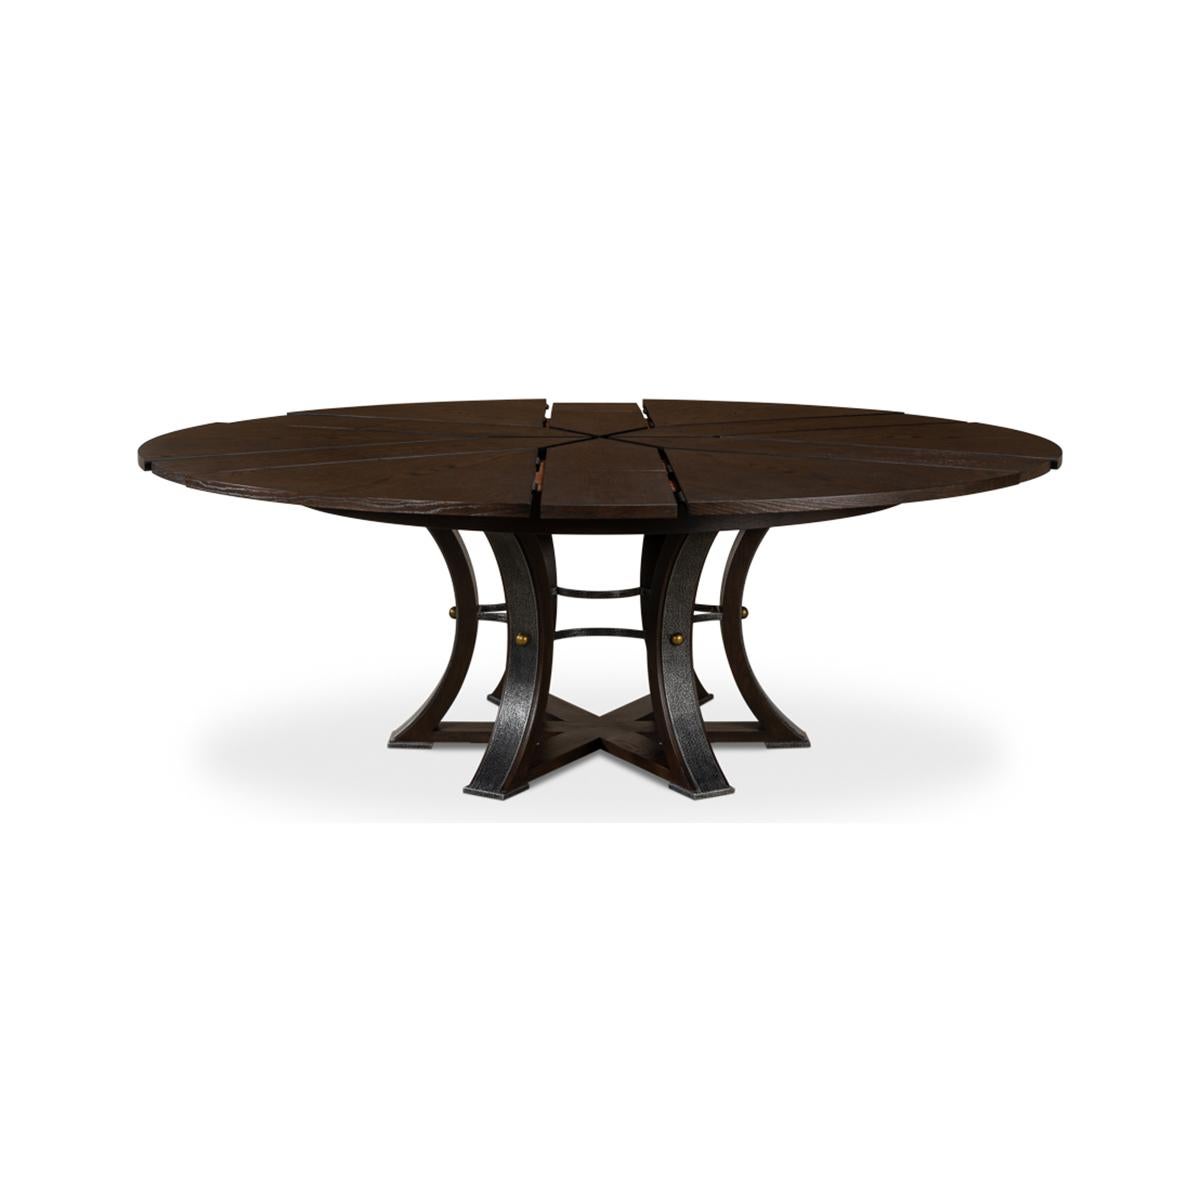 Large Modern Industrial Dining Table - 84 - Burnt Brown In New Condition For Sale In Westwood, NJ